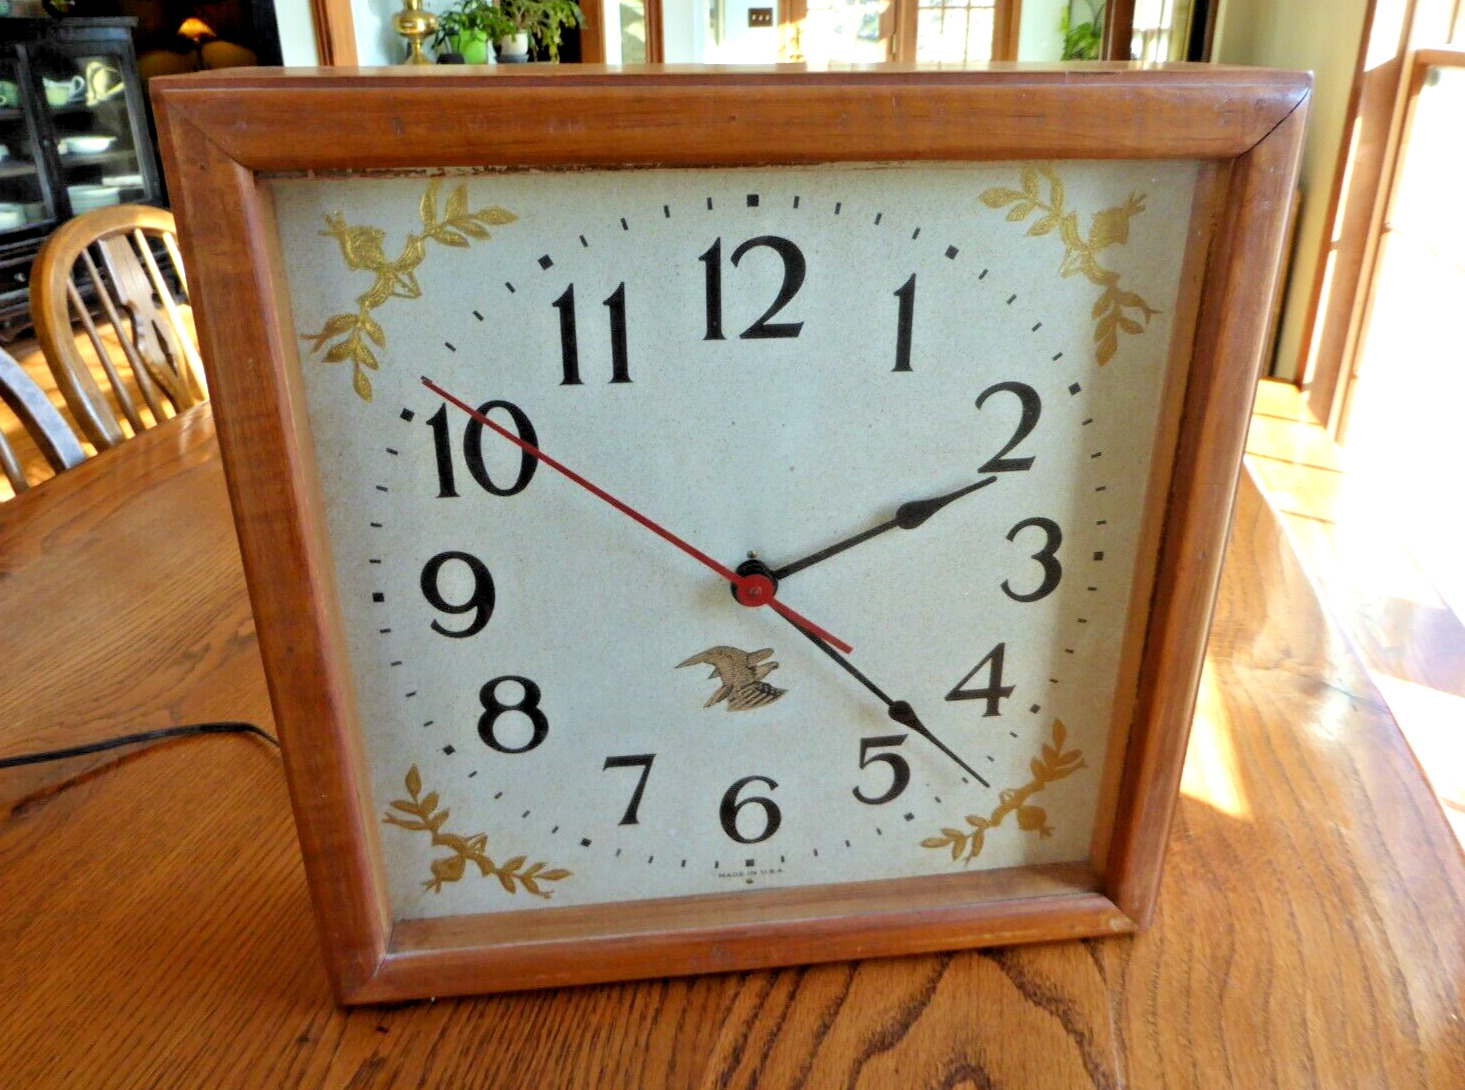 Rare Vintage Wood Synchron Electric Govt. Office/ School Wall Clock Made in USA